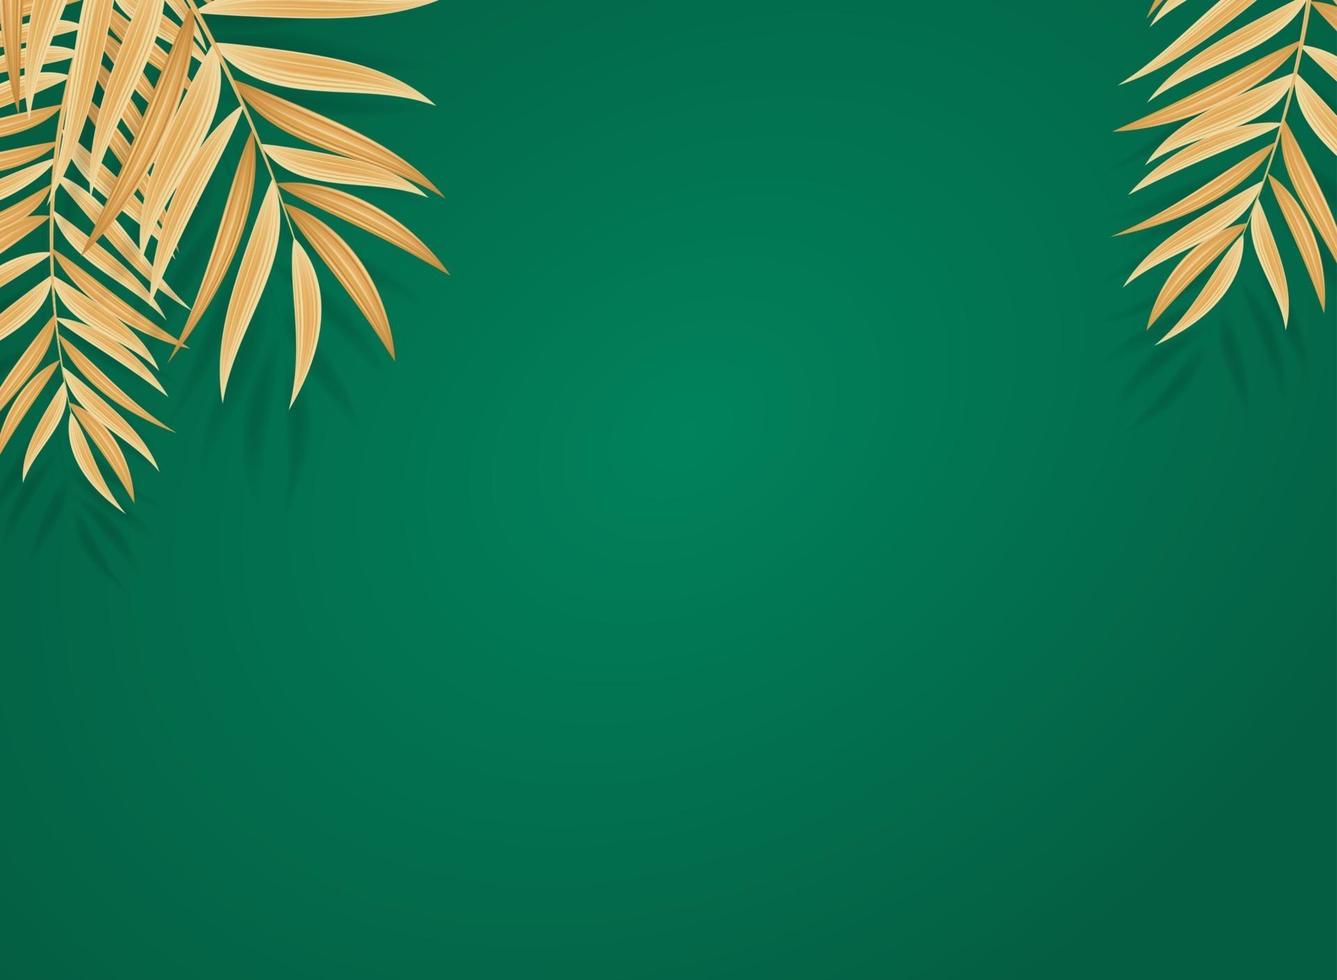 Abstract Realistic Green Palm Leaf Tropical Background vector